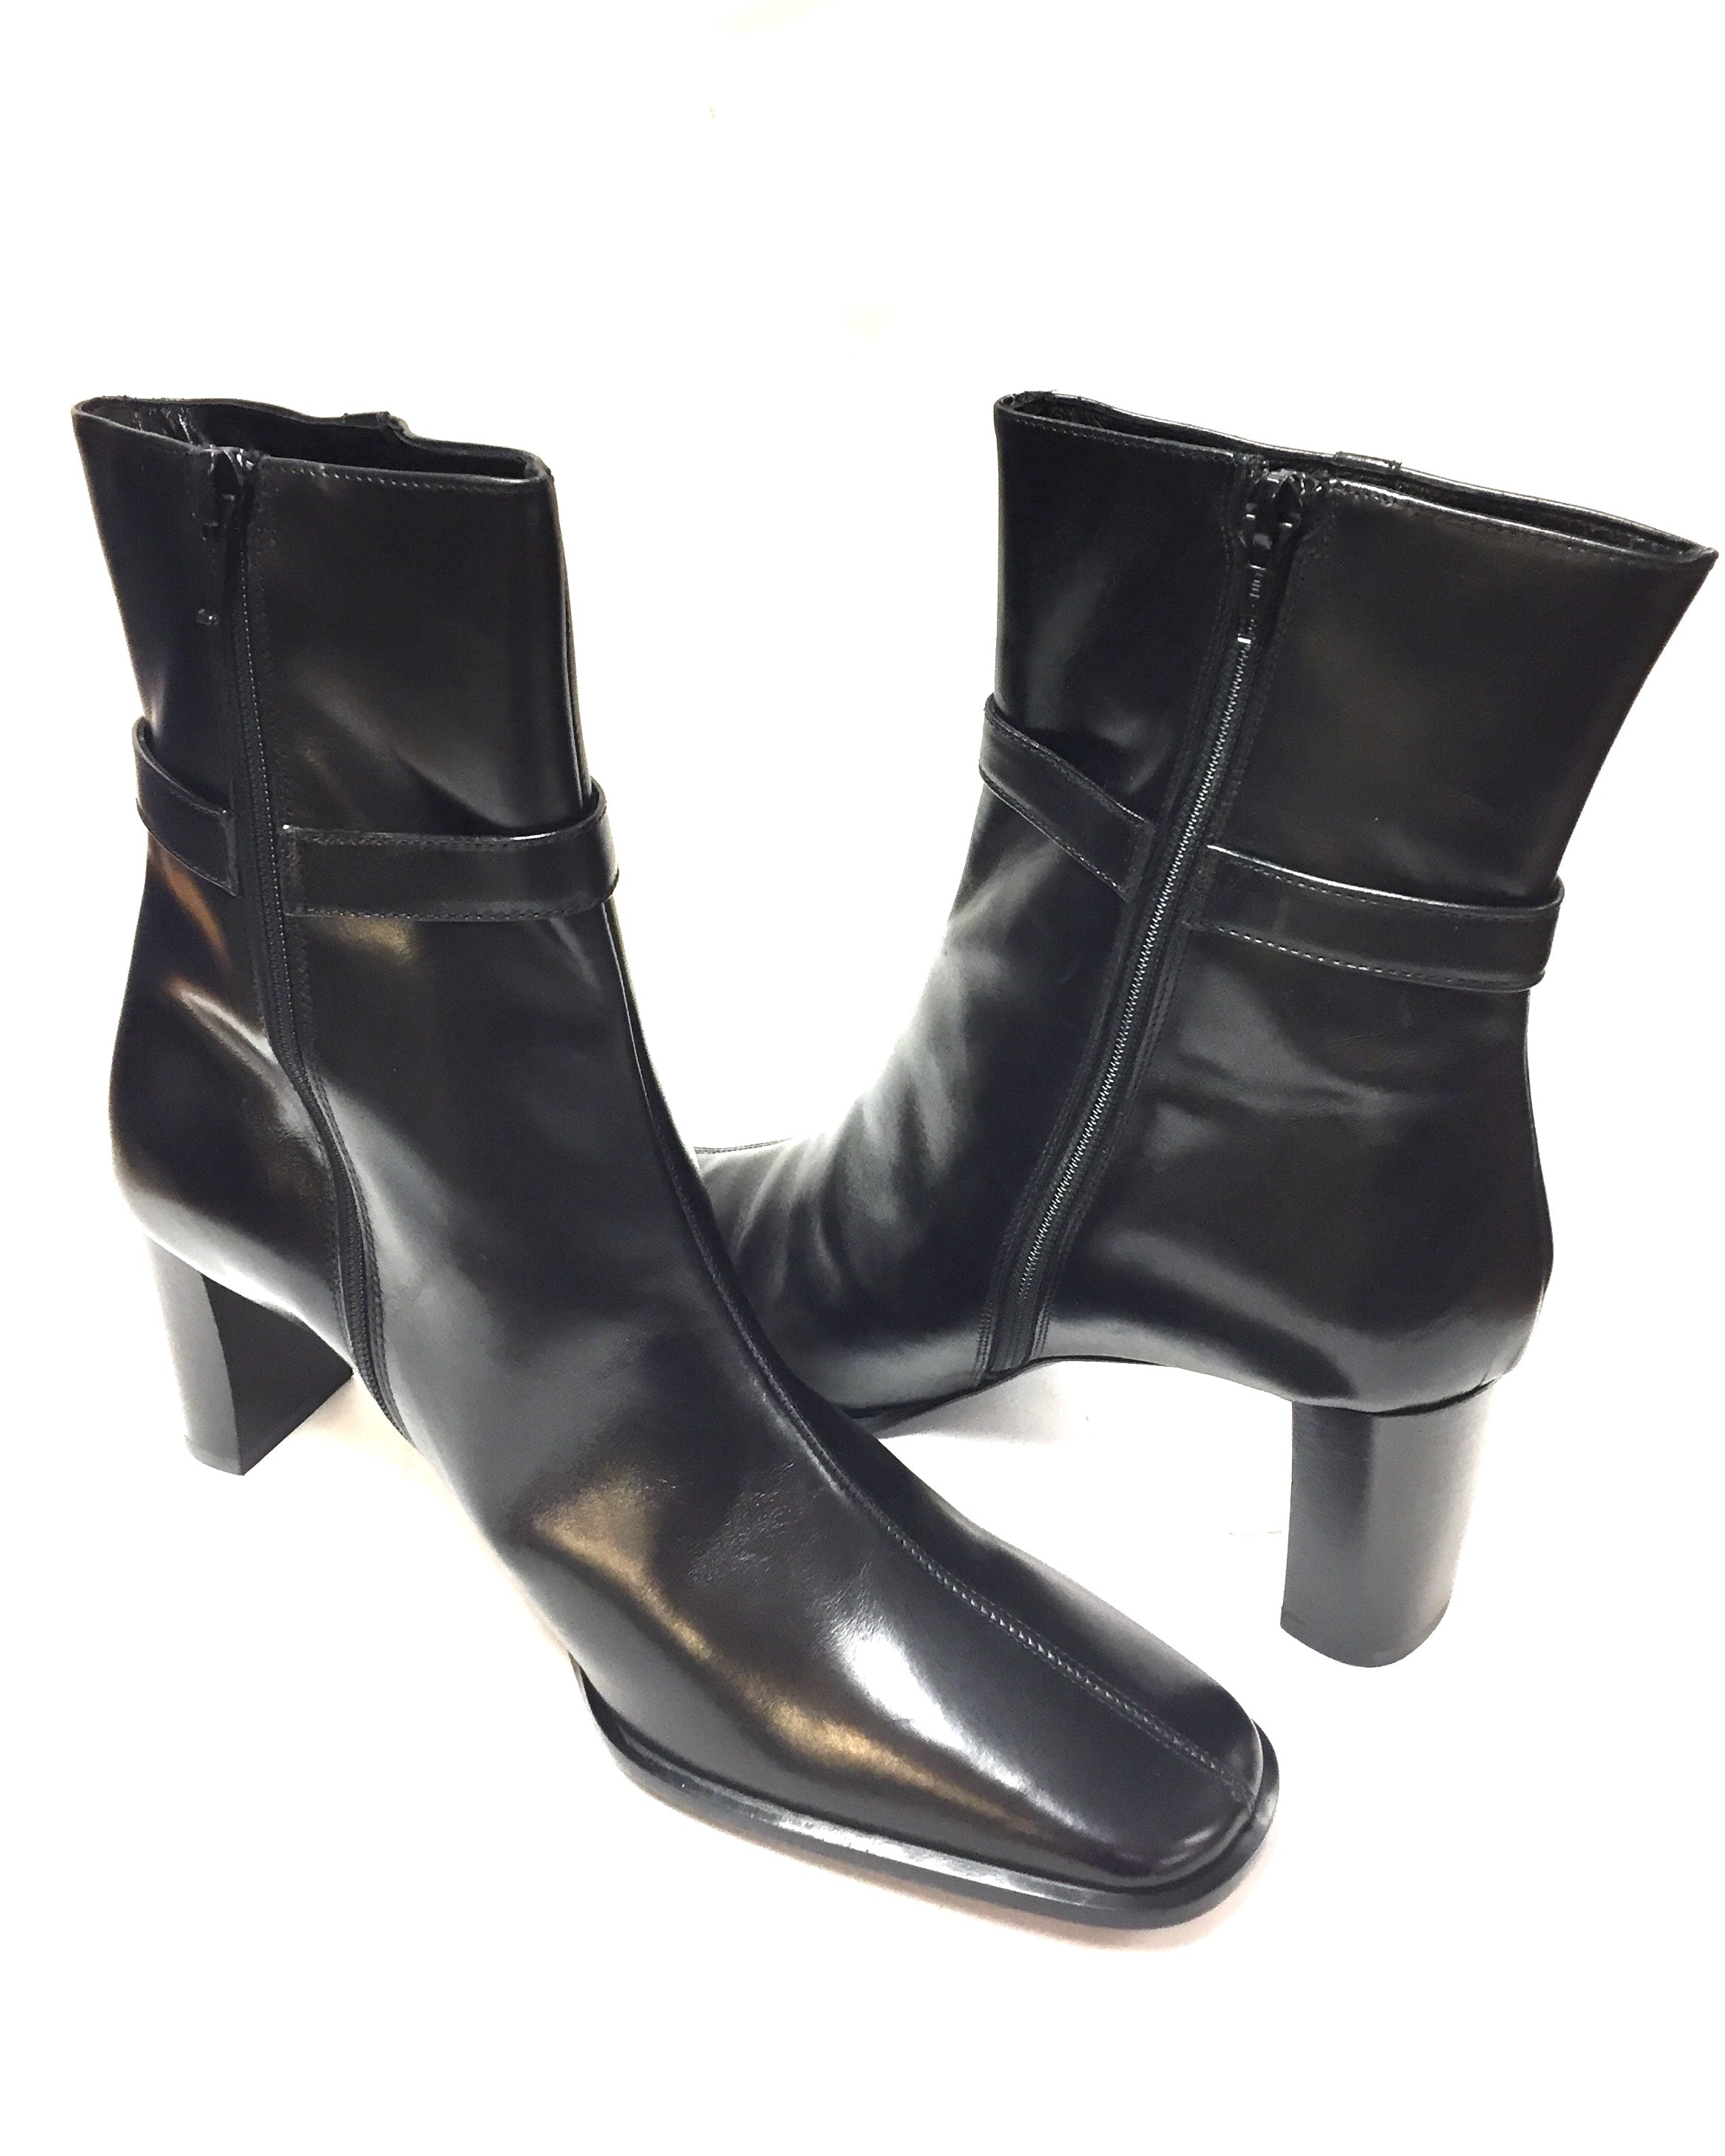 leather mid heel ankle boots